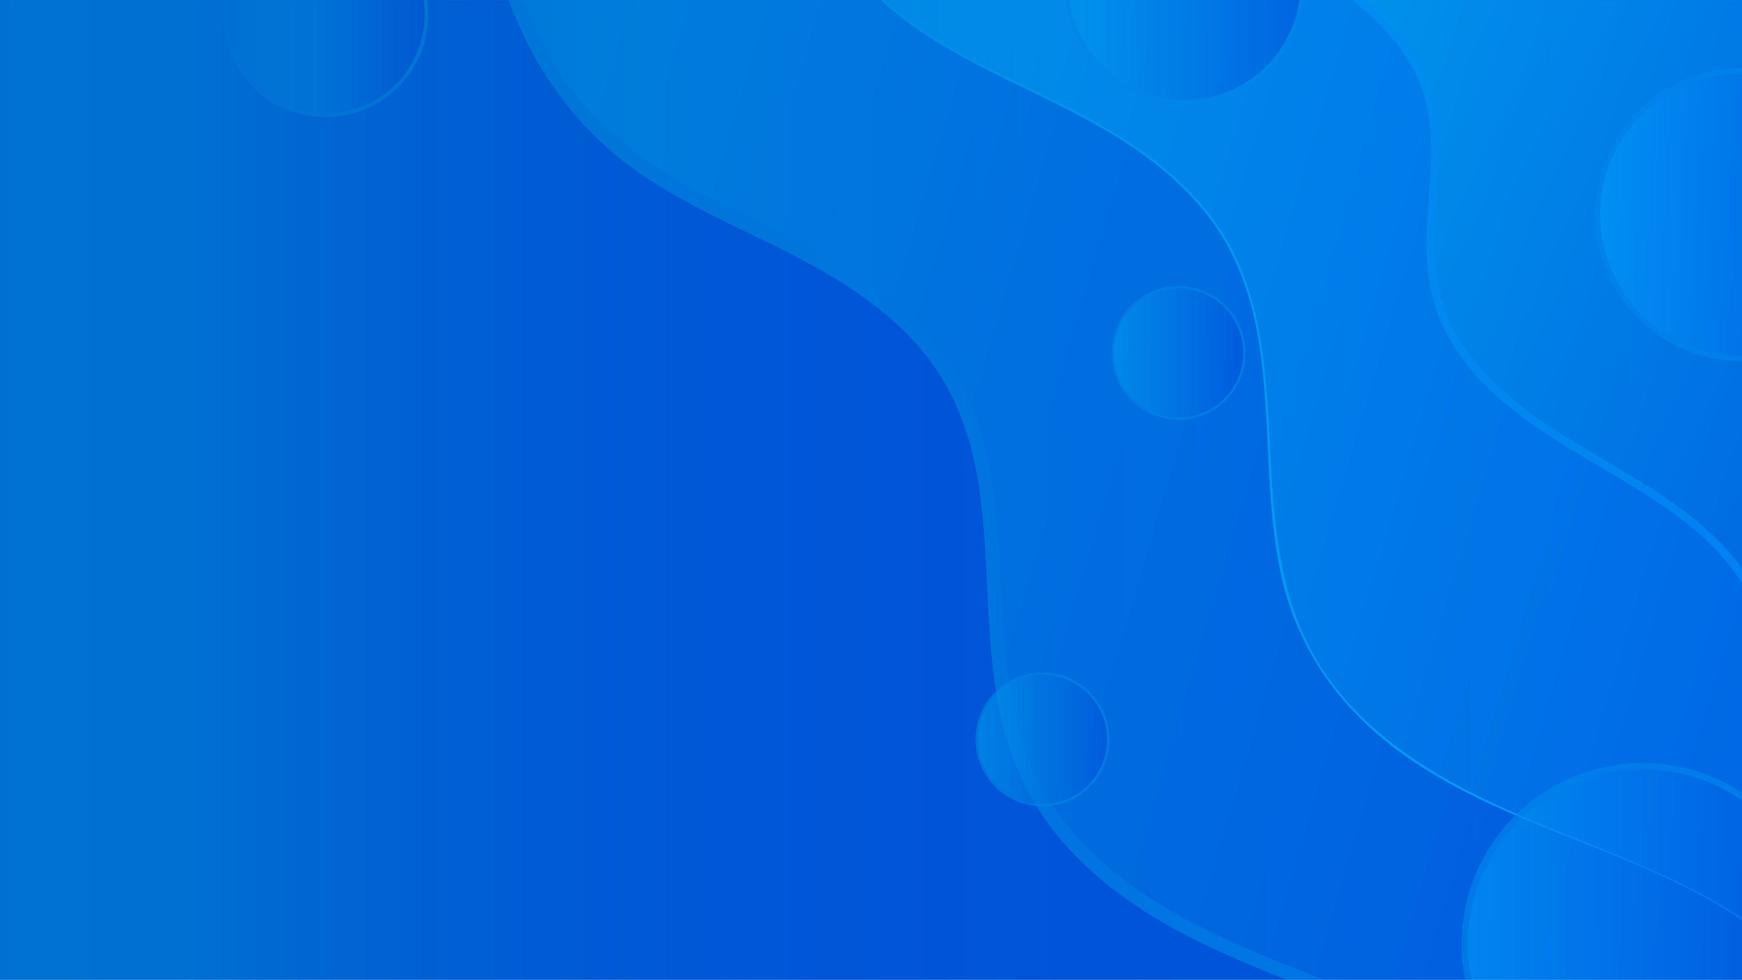 Blue background abstract shape with dots photo